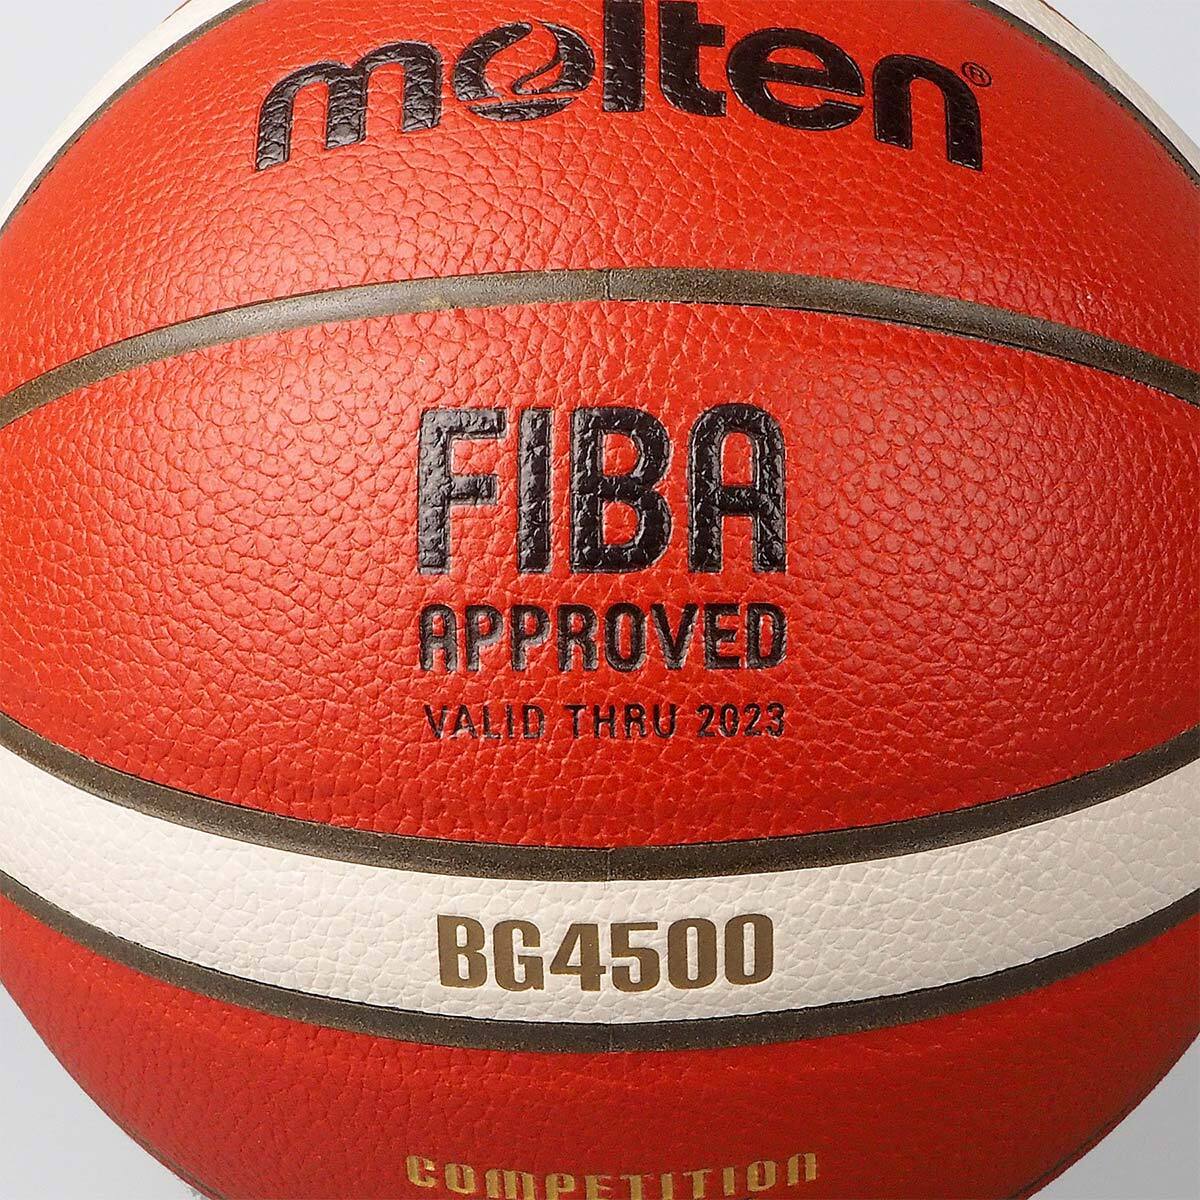 Image for Molten Basketball Size 7